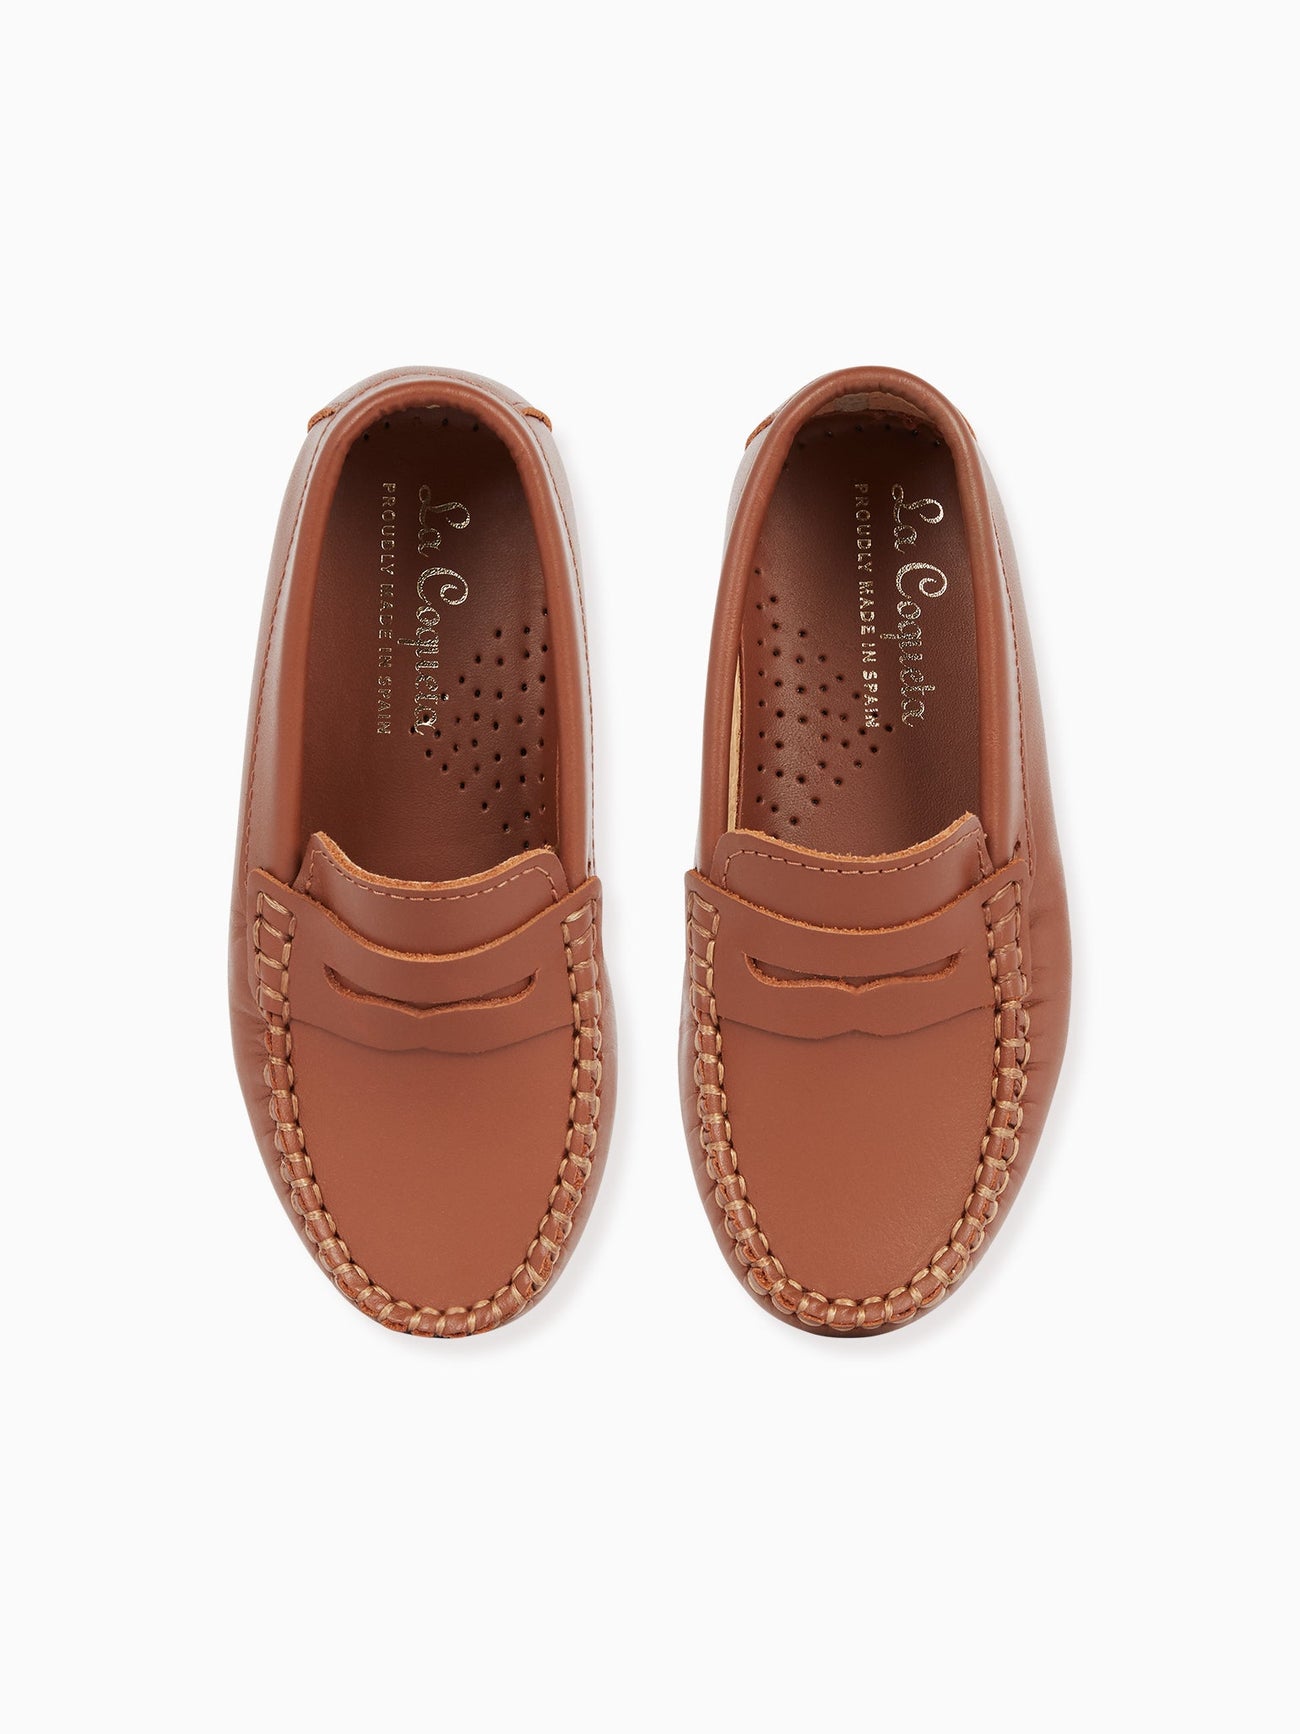 Tan Leather Boy Loafer Shoes